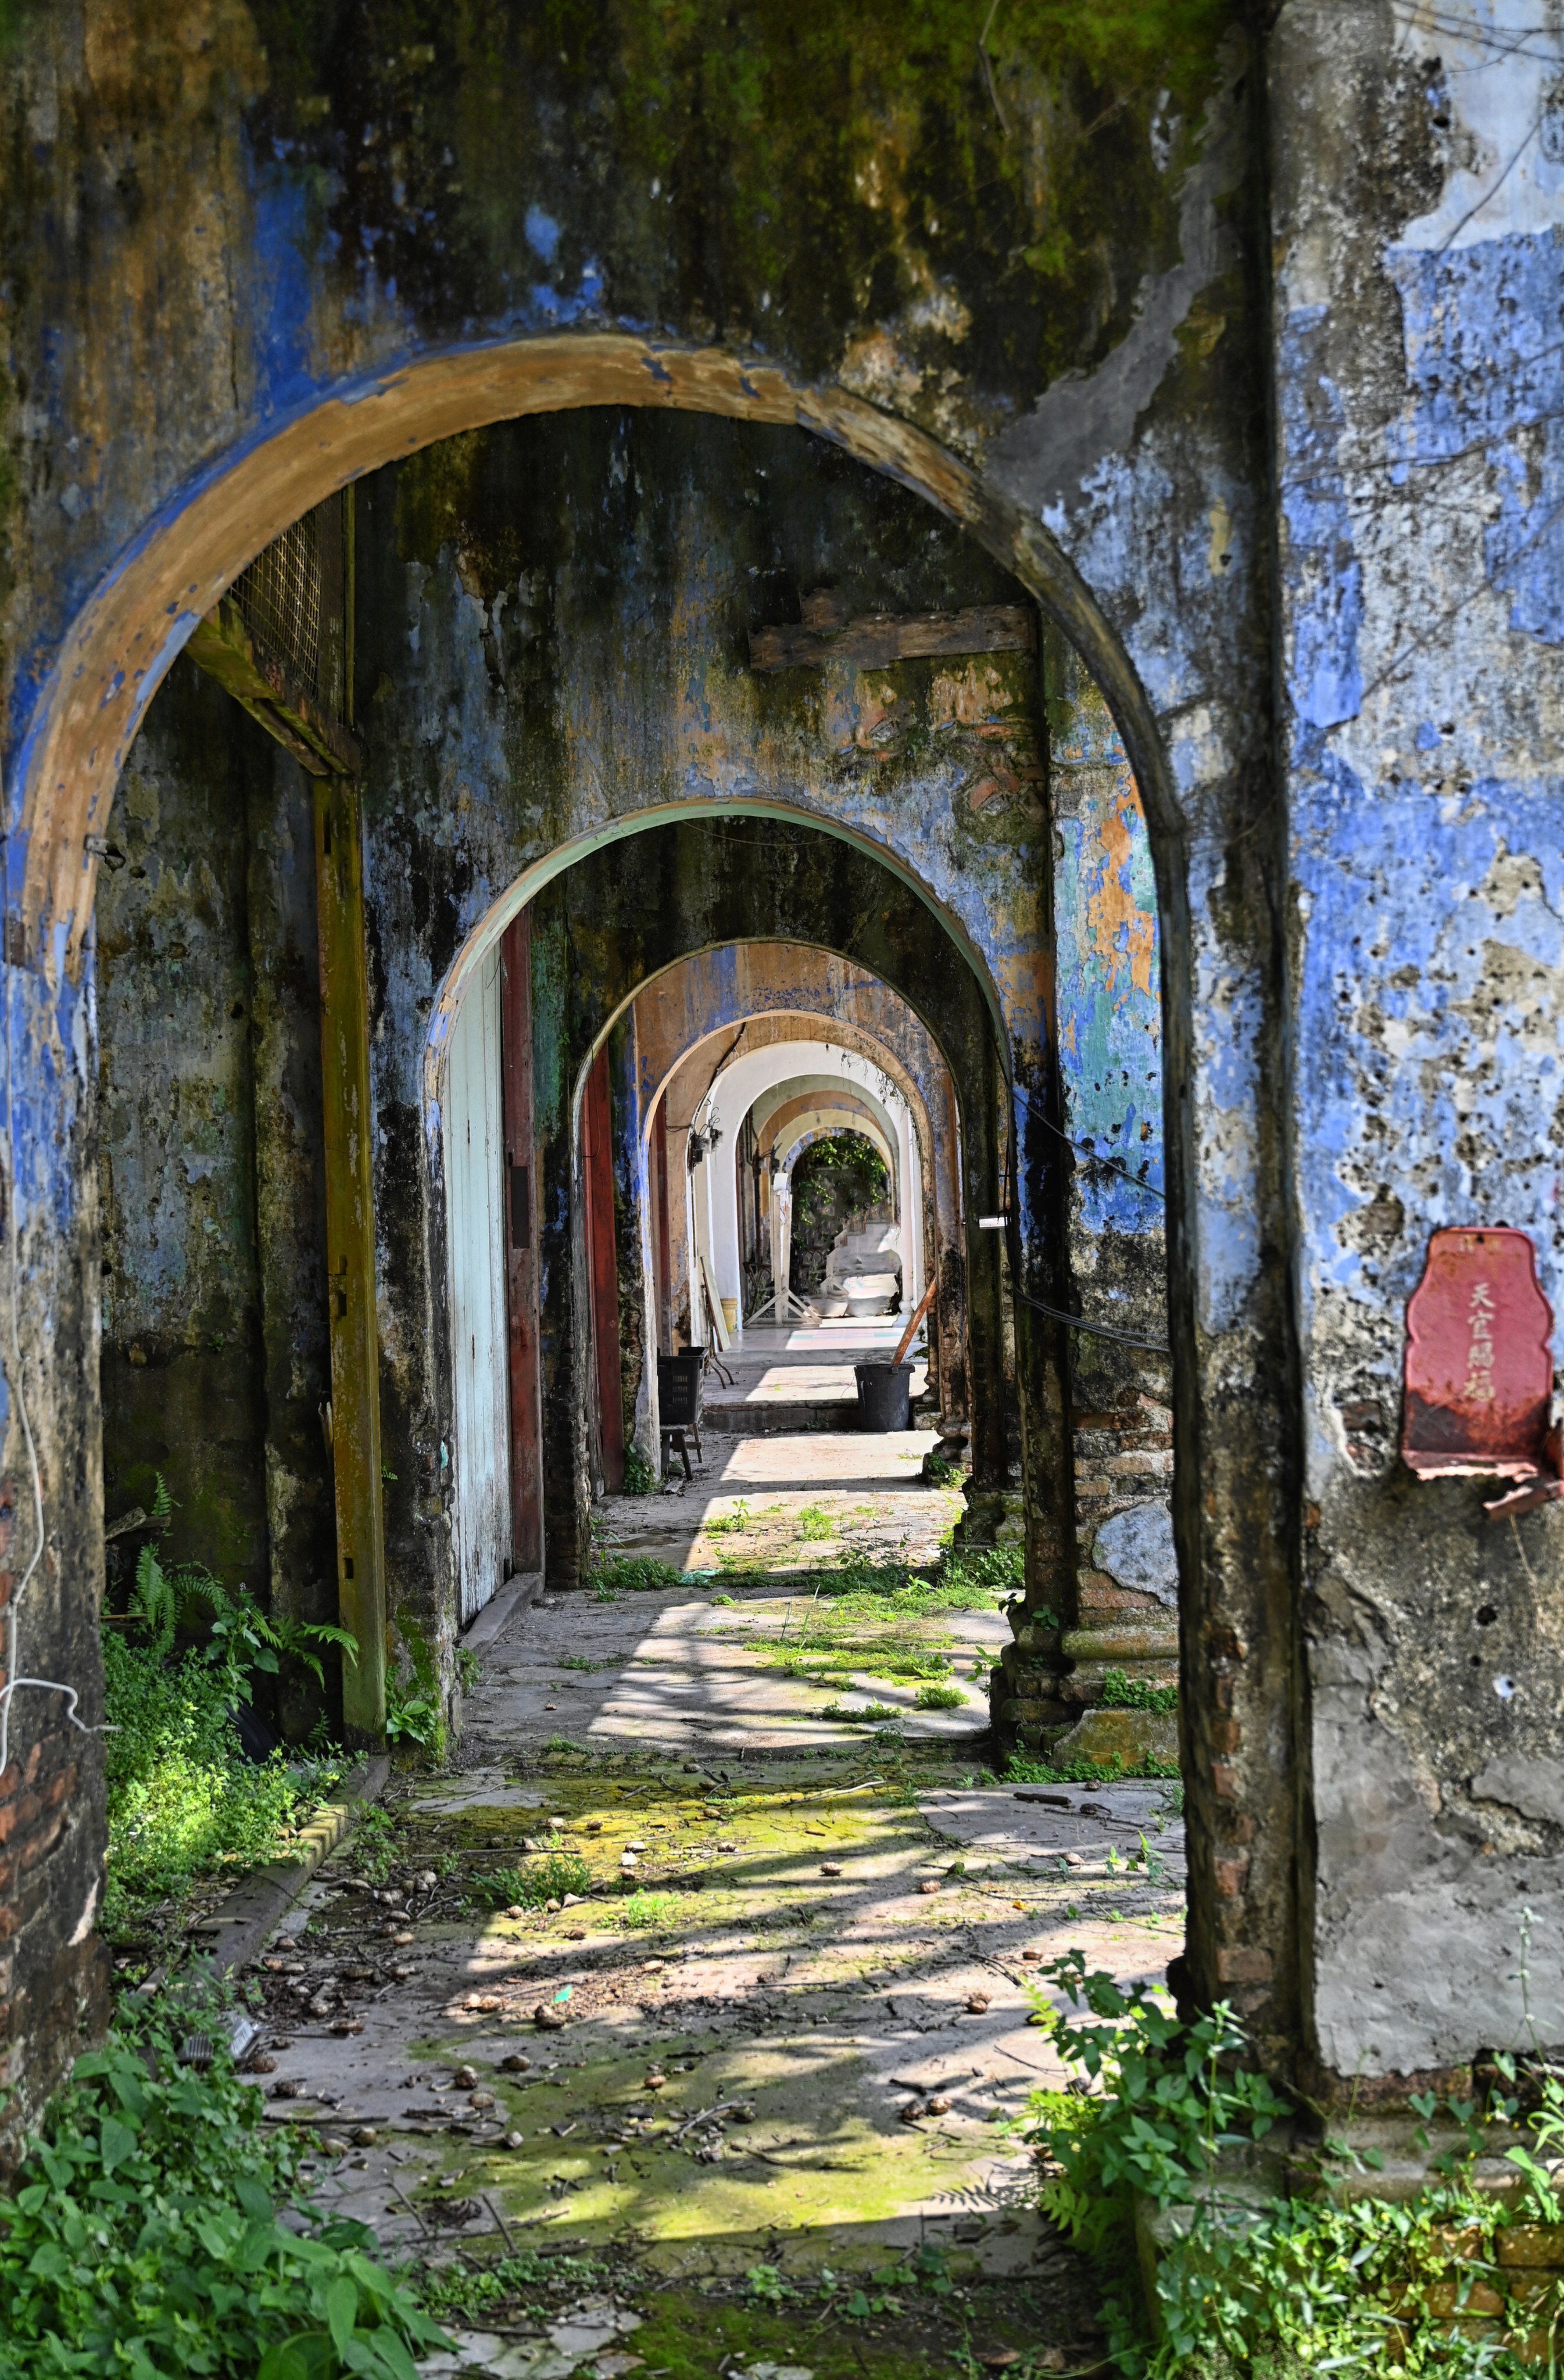 Building arches in Papan, Malaysia. Photo: Philippe Durant